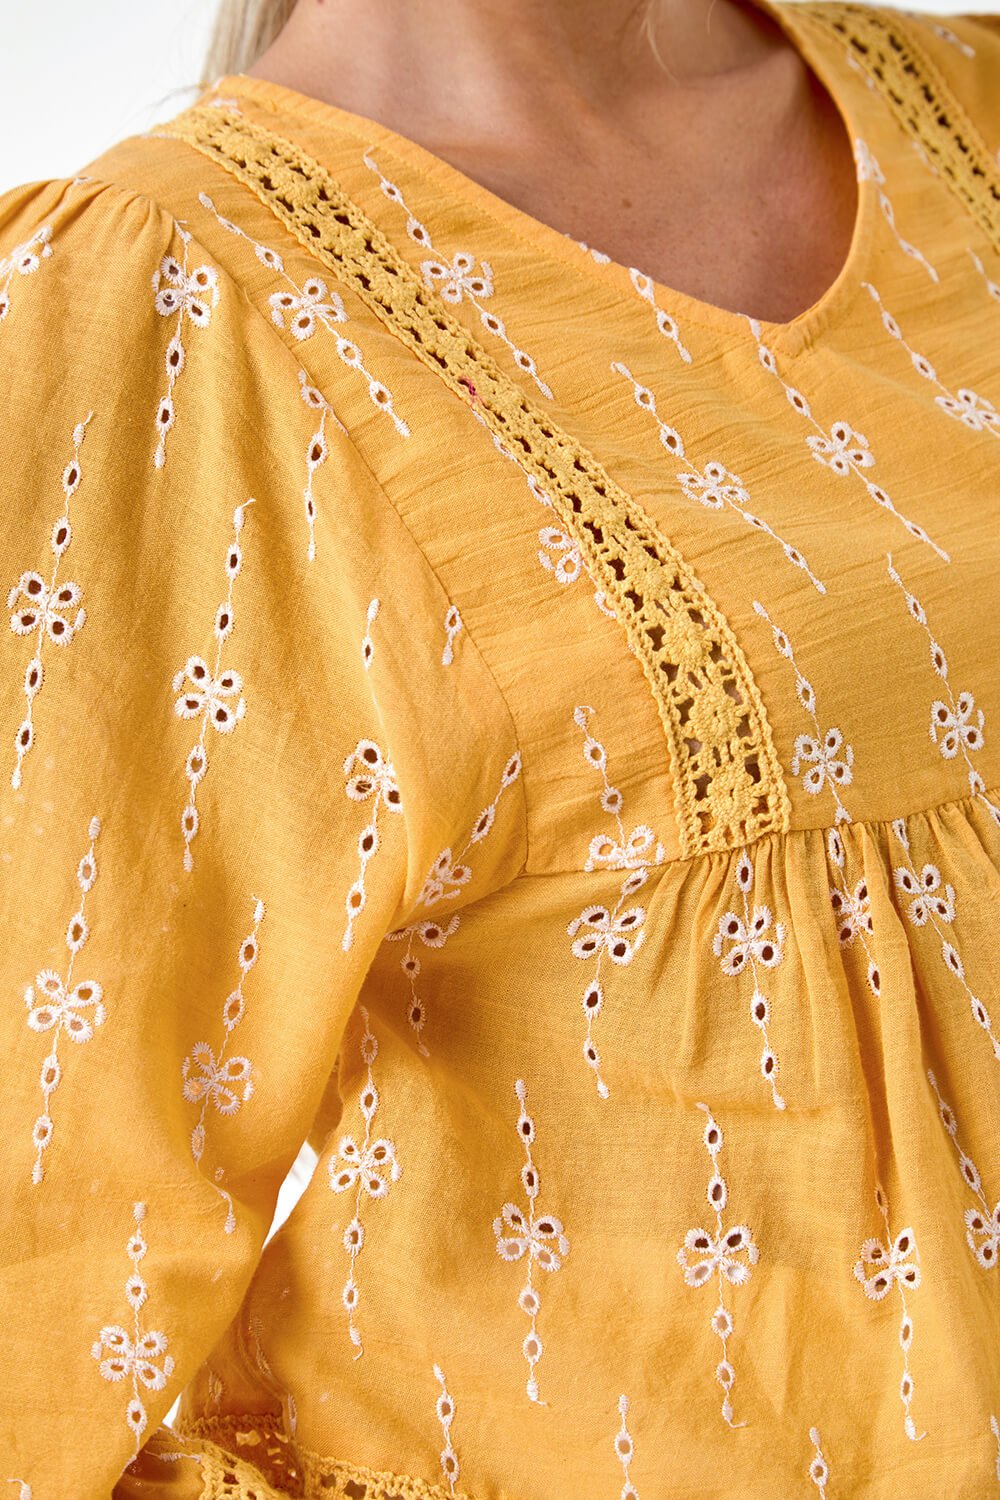 MANGO Petite Embroidered Cotton Smock Top, Image 5 of 5